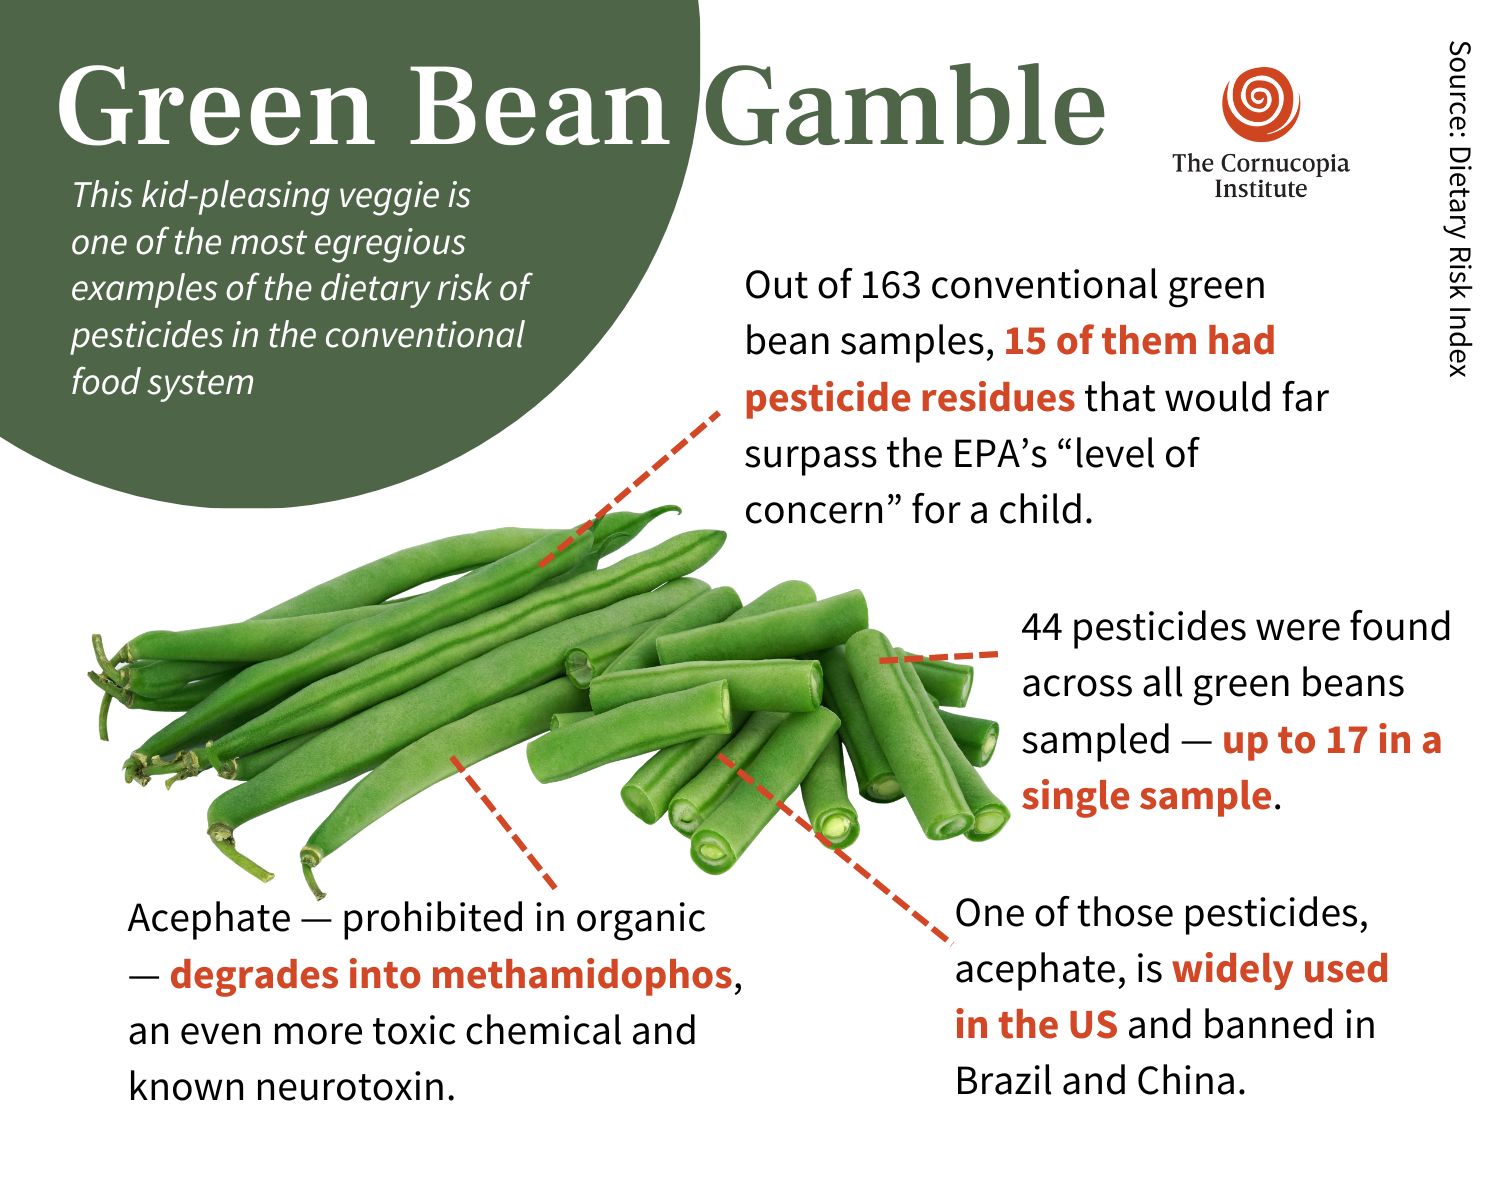 An image of green beans with information about pesticide residues